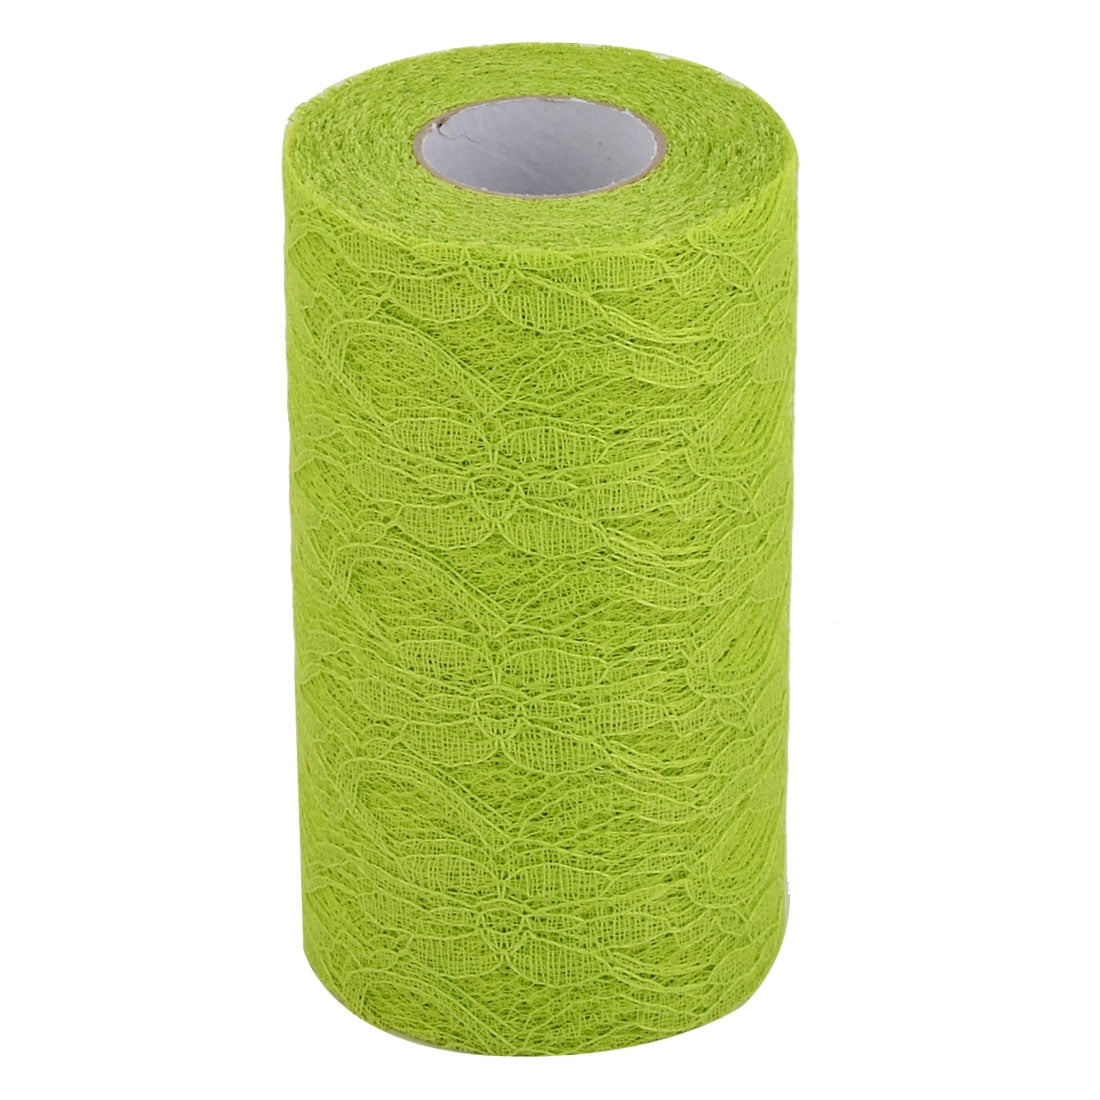 Hemoton 3pcs Craft Ribbons Sewing Tulle Material DIY Gauze Ribbon Sewing  Tulle Fabric Grosgrain Ribbon Tulle Ribbon for Gift Wrapping lace Trim  Gauze